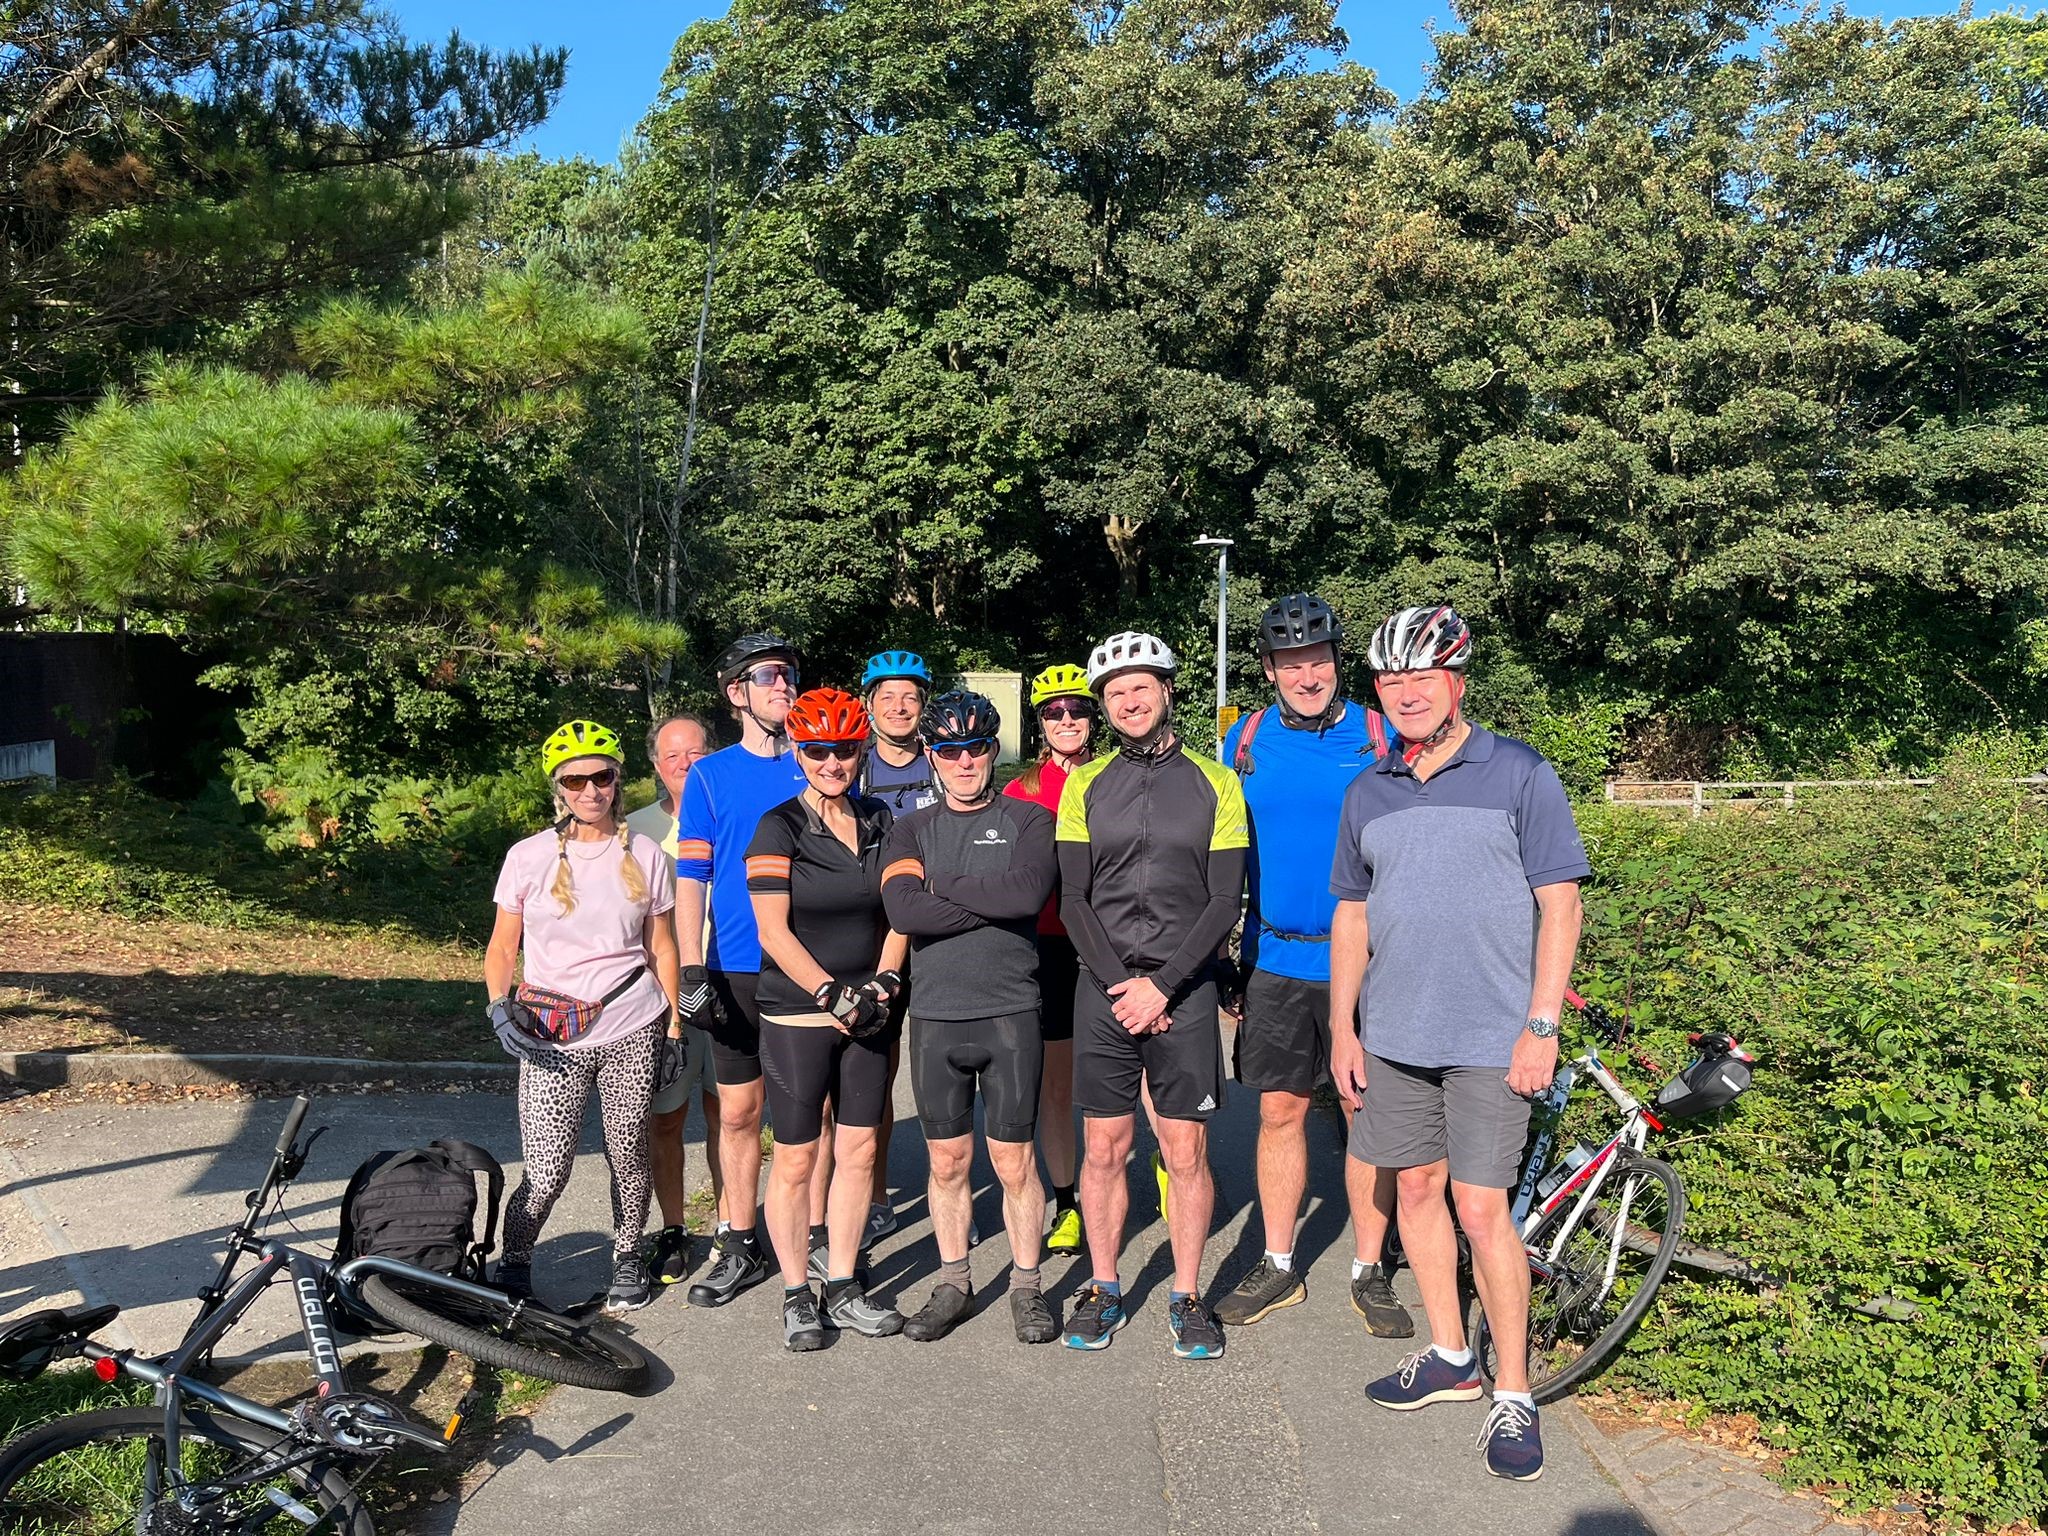 Tim and his group of cycling colleagues standing on a cycle path on a sunny day, smiling at the camera while dressed in cycling gear